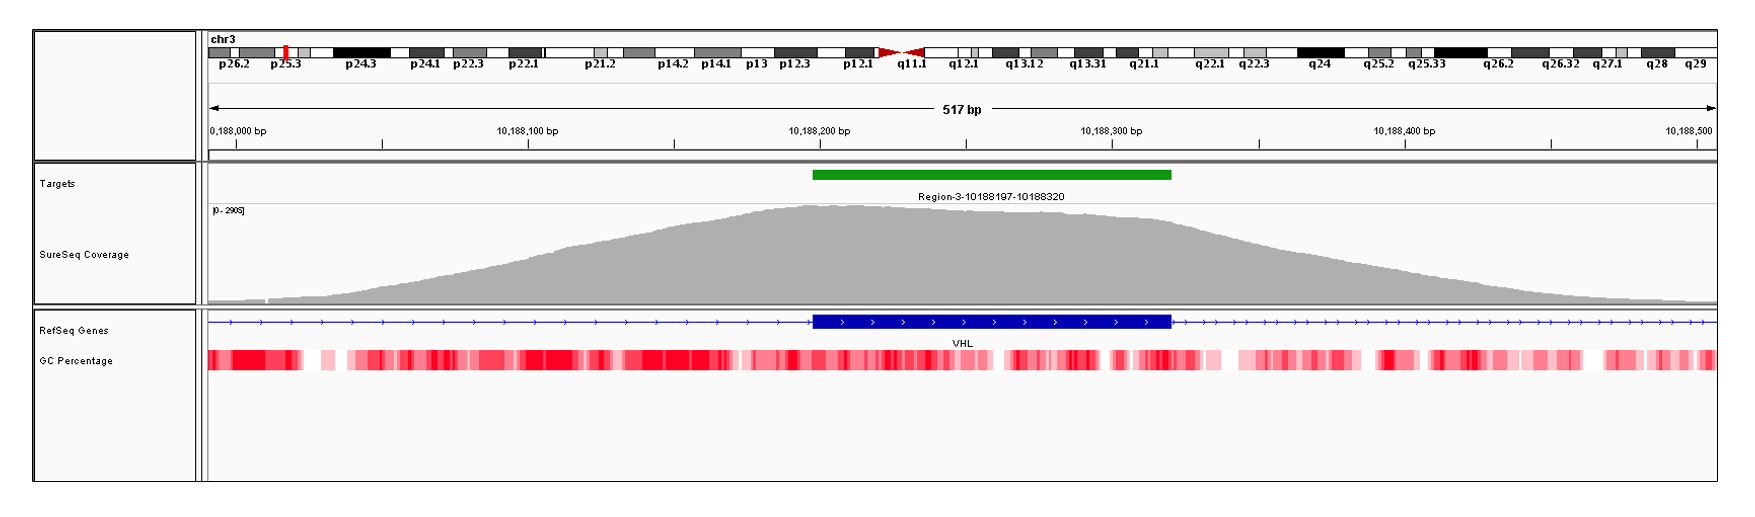 VHL Exon 2 (hg19 chr3:10188198-10188320). Depth of coverage per base (grey). Targeted region (green). Gene coding region as defined by RefSeq (blue). GC percentage (red). Image